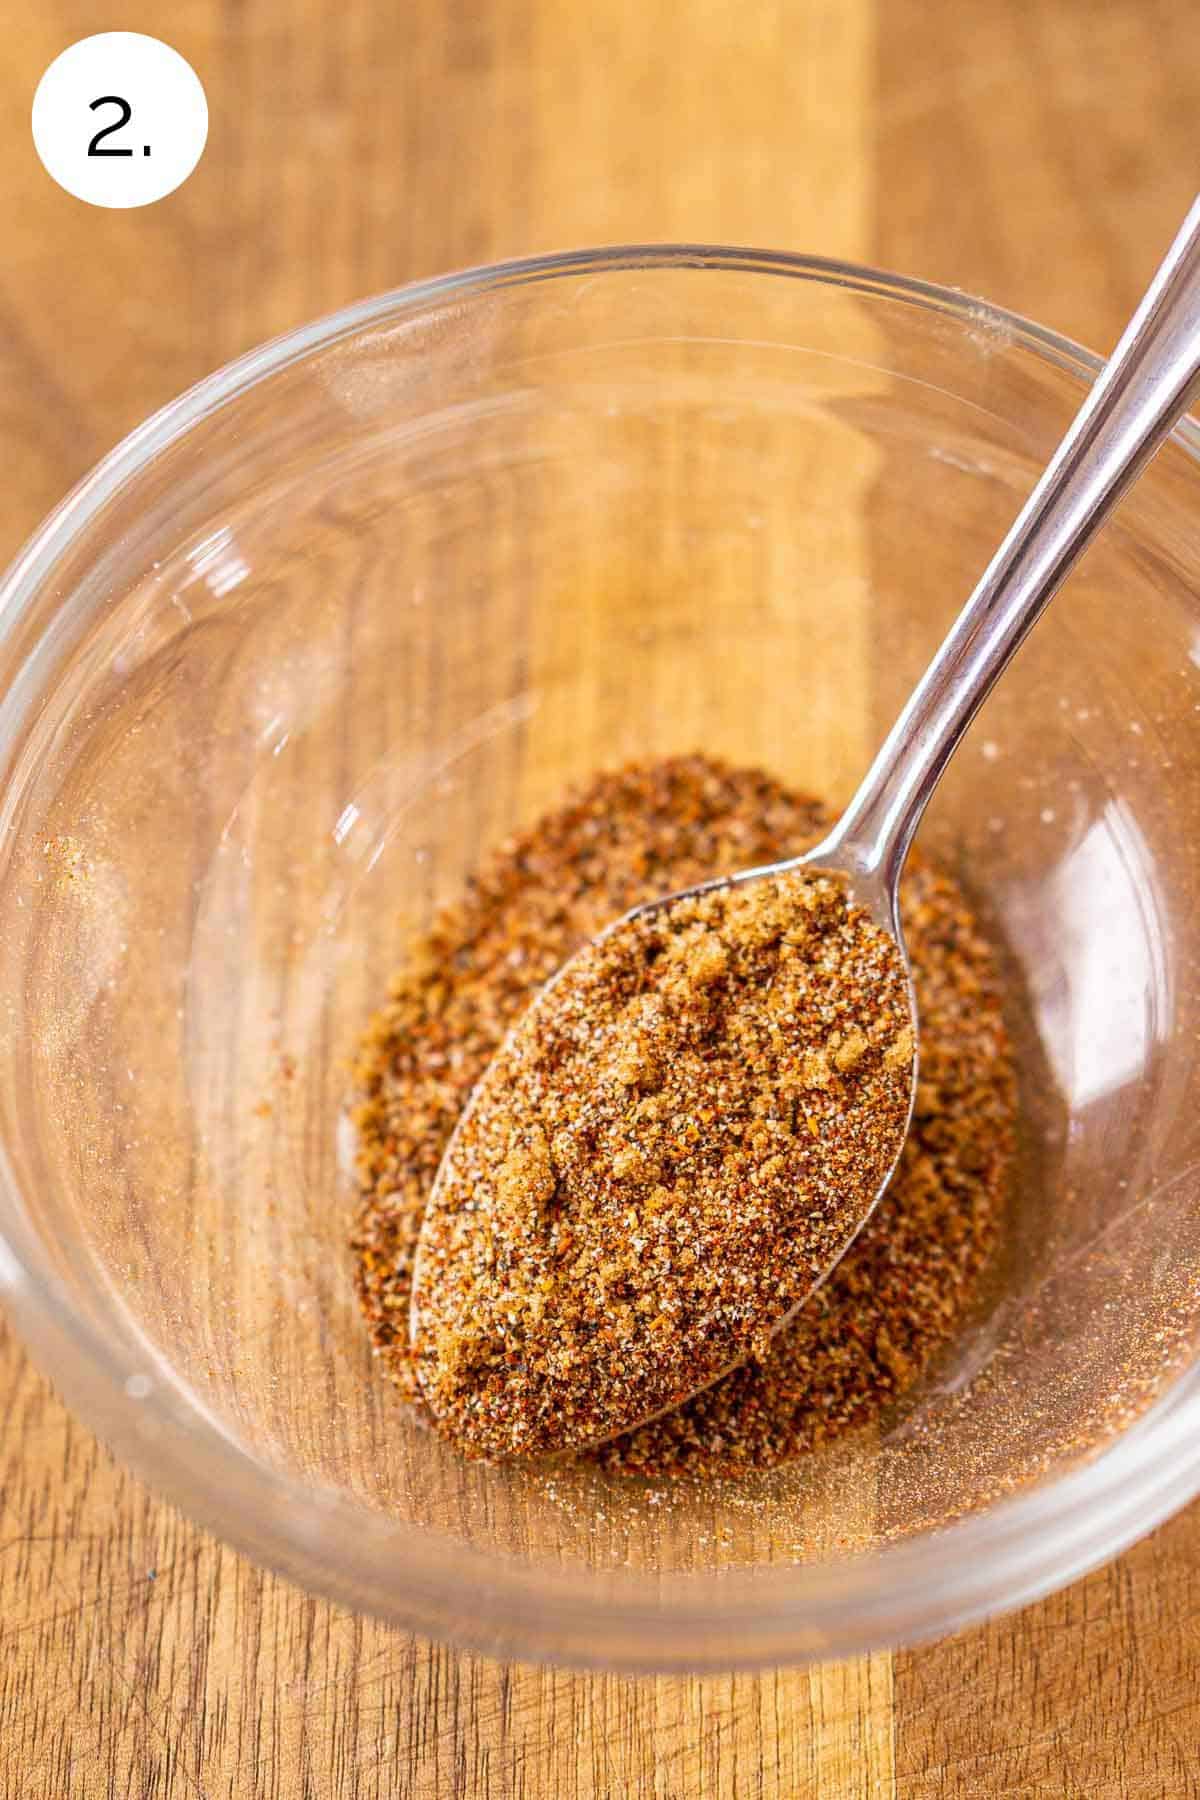 A spoon in a small glass bowl showing the dry rub after it's been stirred together to make one cohesive mixture.